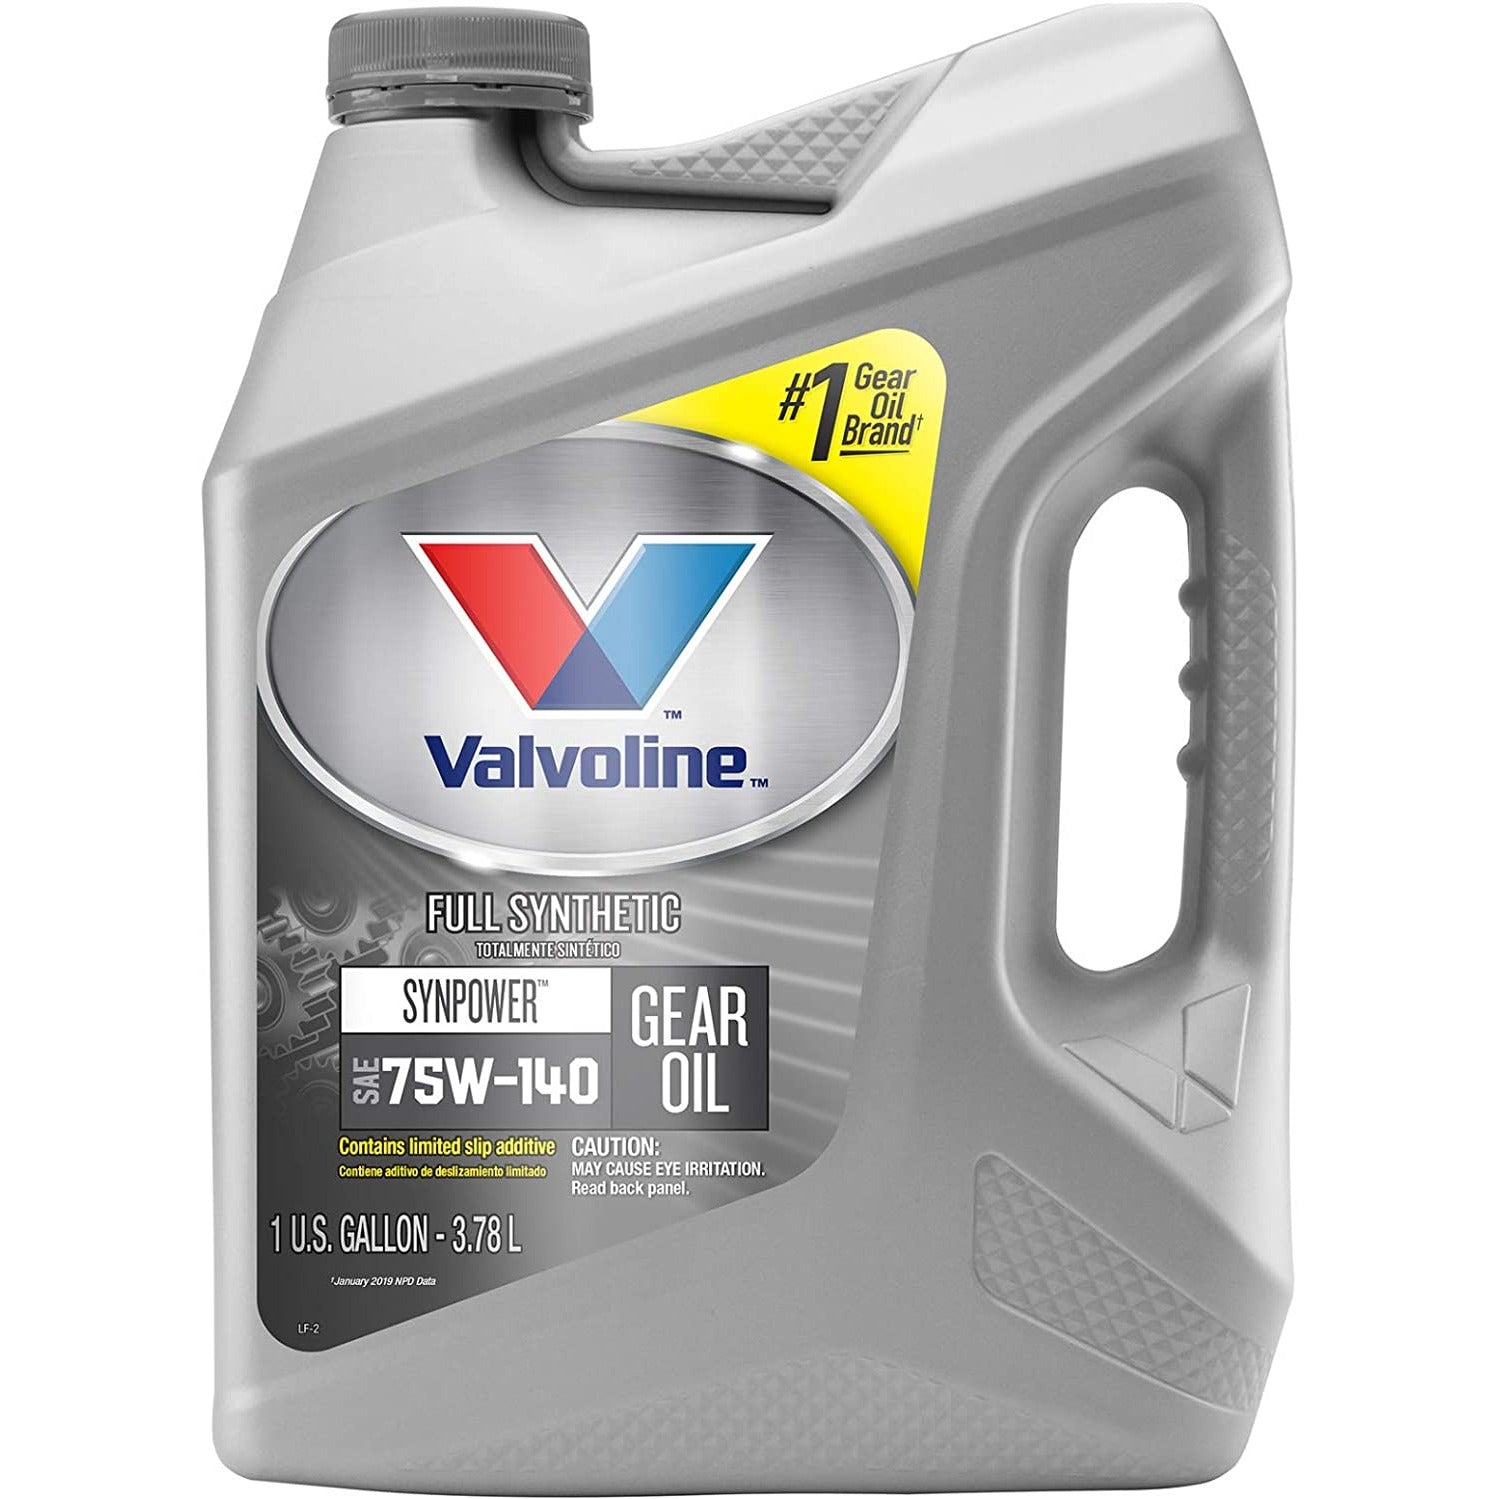 VAL 887344 | SYN POWER FULL SYNTHETIC TRANS & DIFF GEAR OIL 75W-140 : 1 GAL